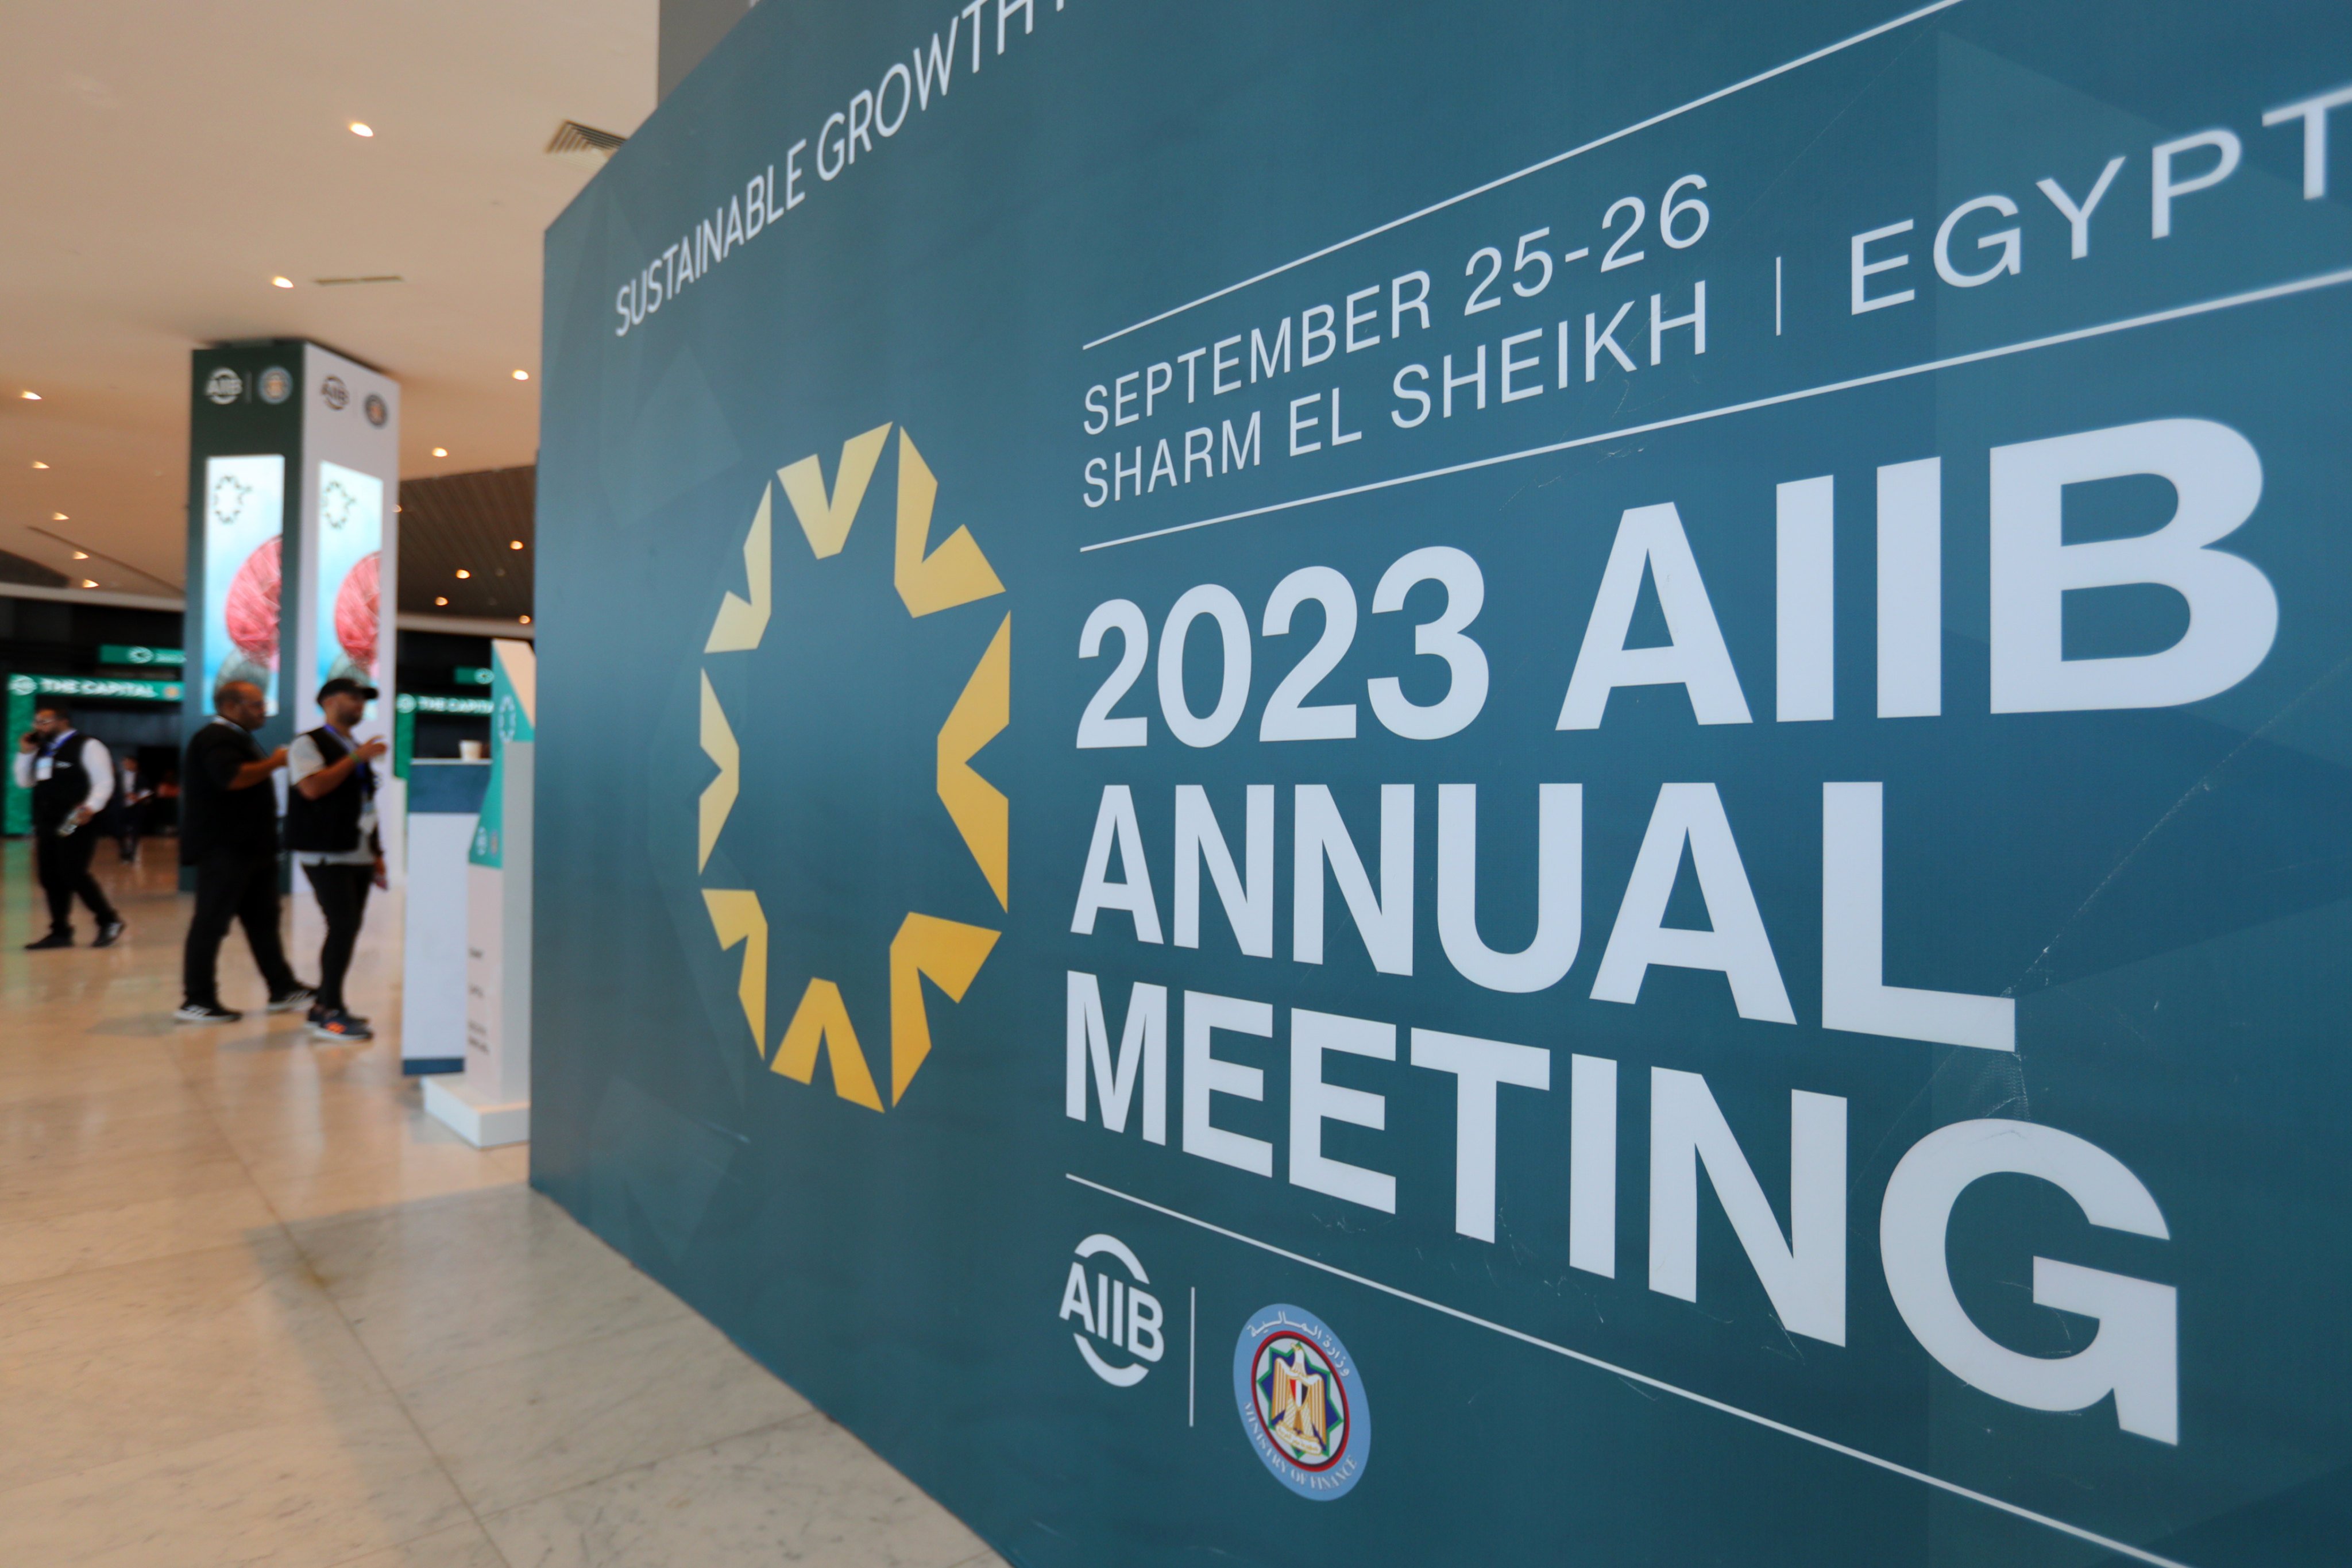 The eighth annual meeting of the board of governors of the Asian Infrastructure Investment Bank (AIIB) started on Monday in the Egyptian resort of Sharm El-Sheikh under the theme “Sustainable Growth in a Challenging World”. Photo: Xinhua